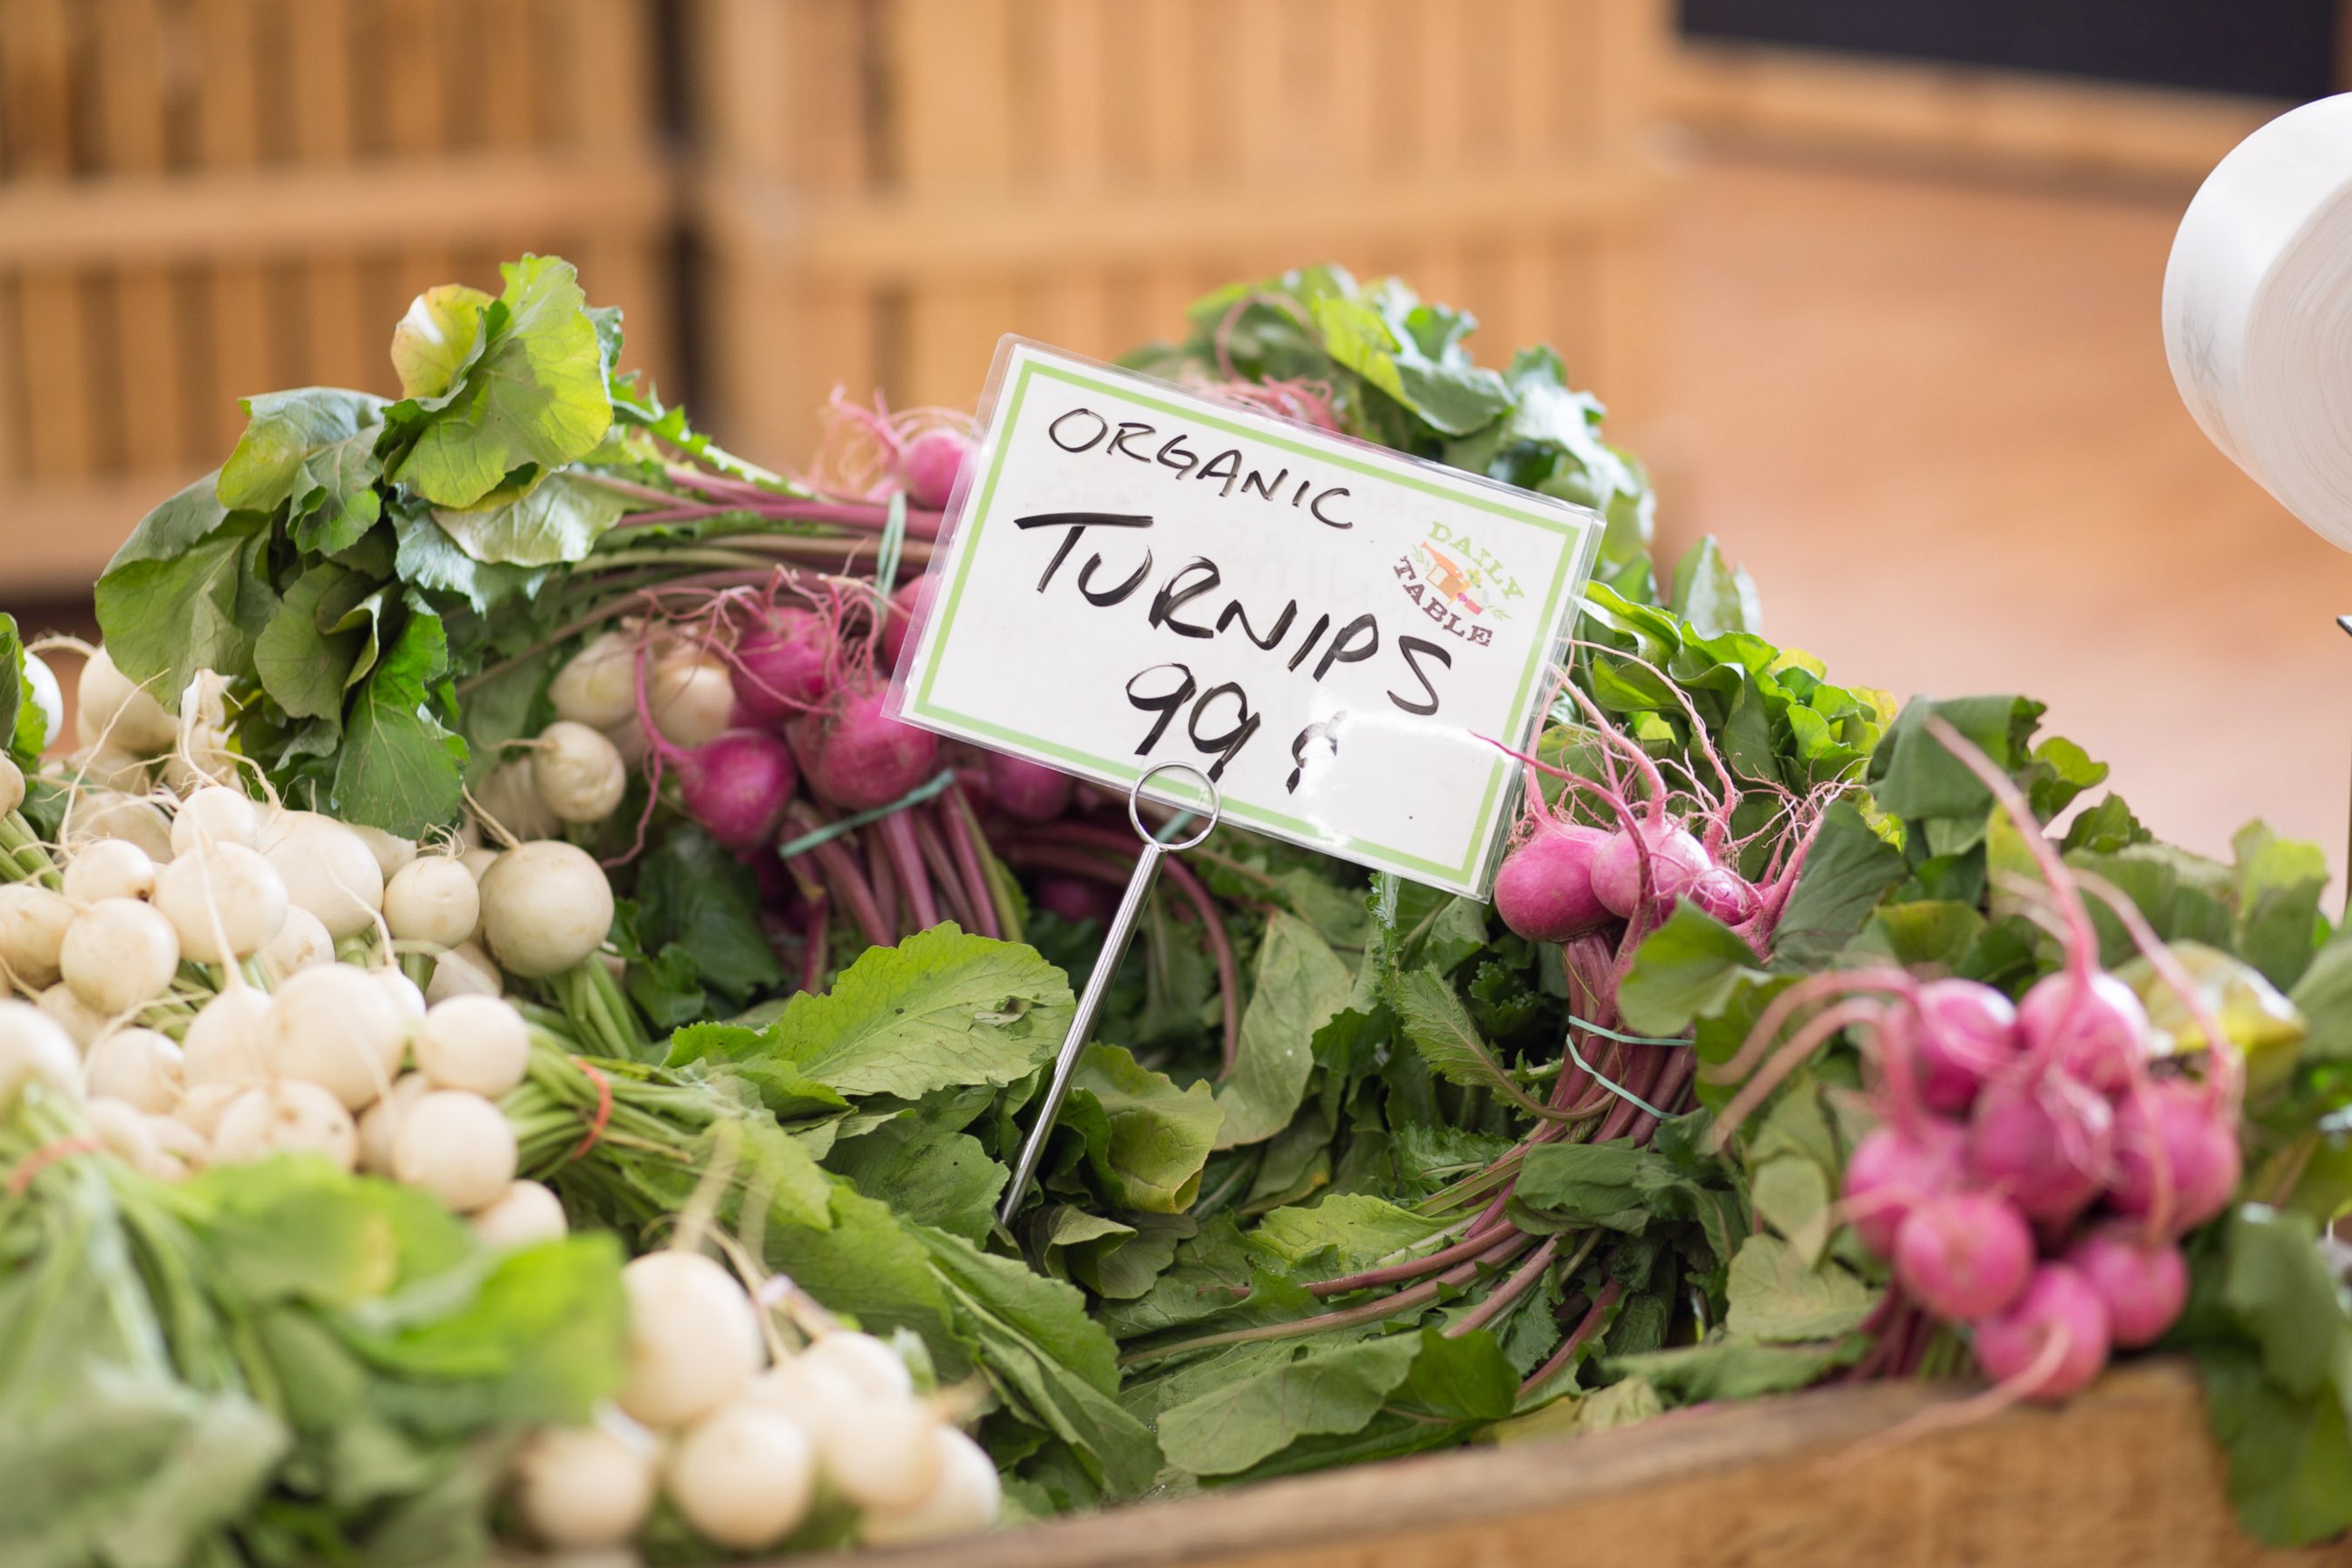 PHOTO: Daily Table even has organic produce, like these turnips for 99 cents a bunch.